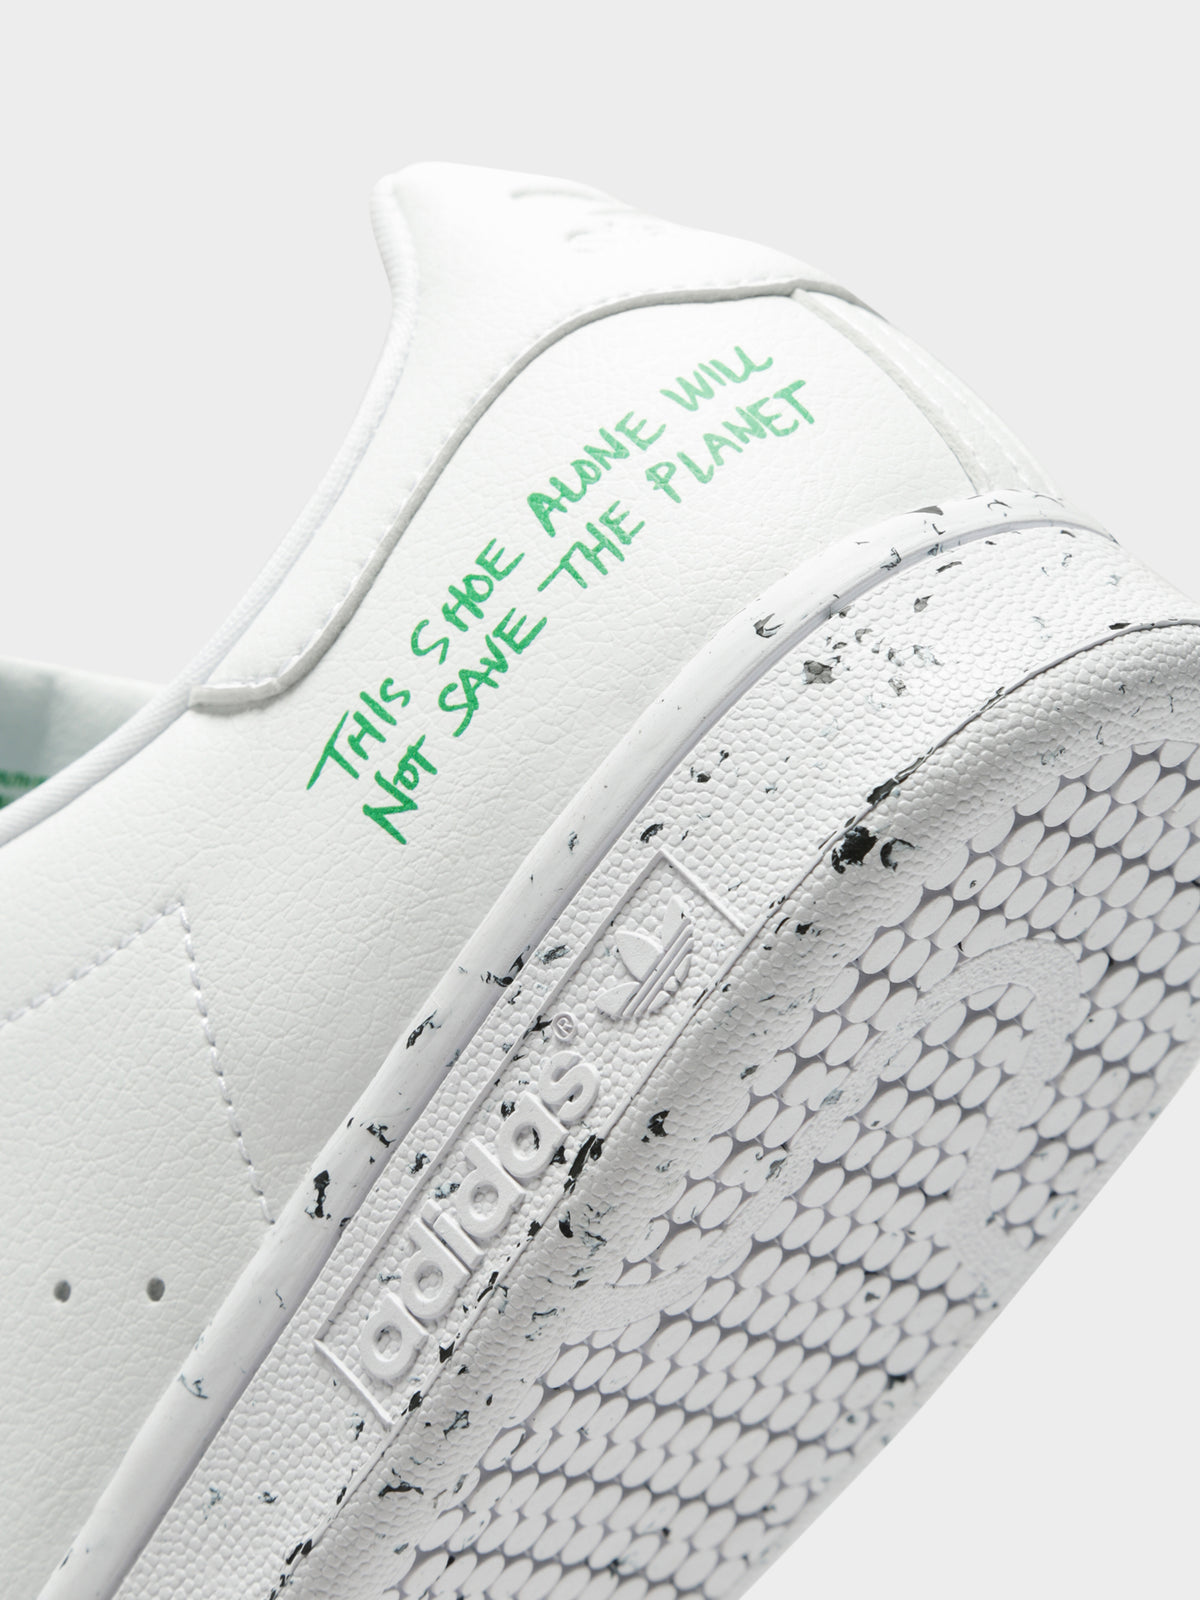 Unisex Stan Smith Sneakers in White &amp; Green